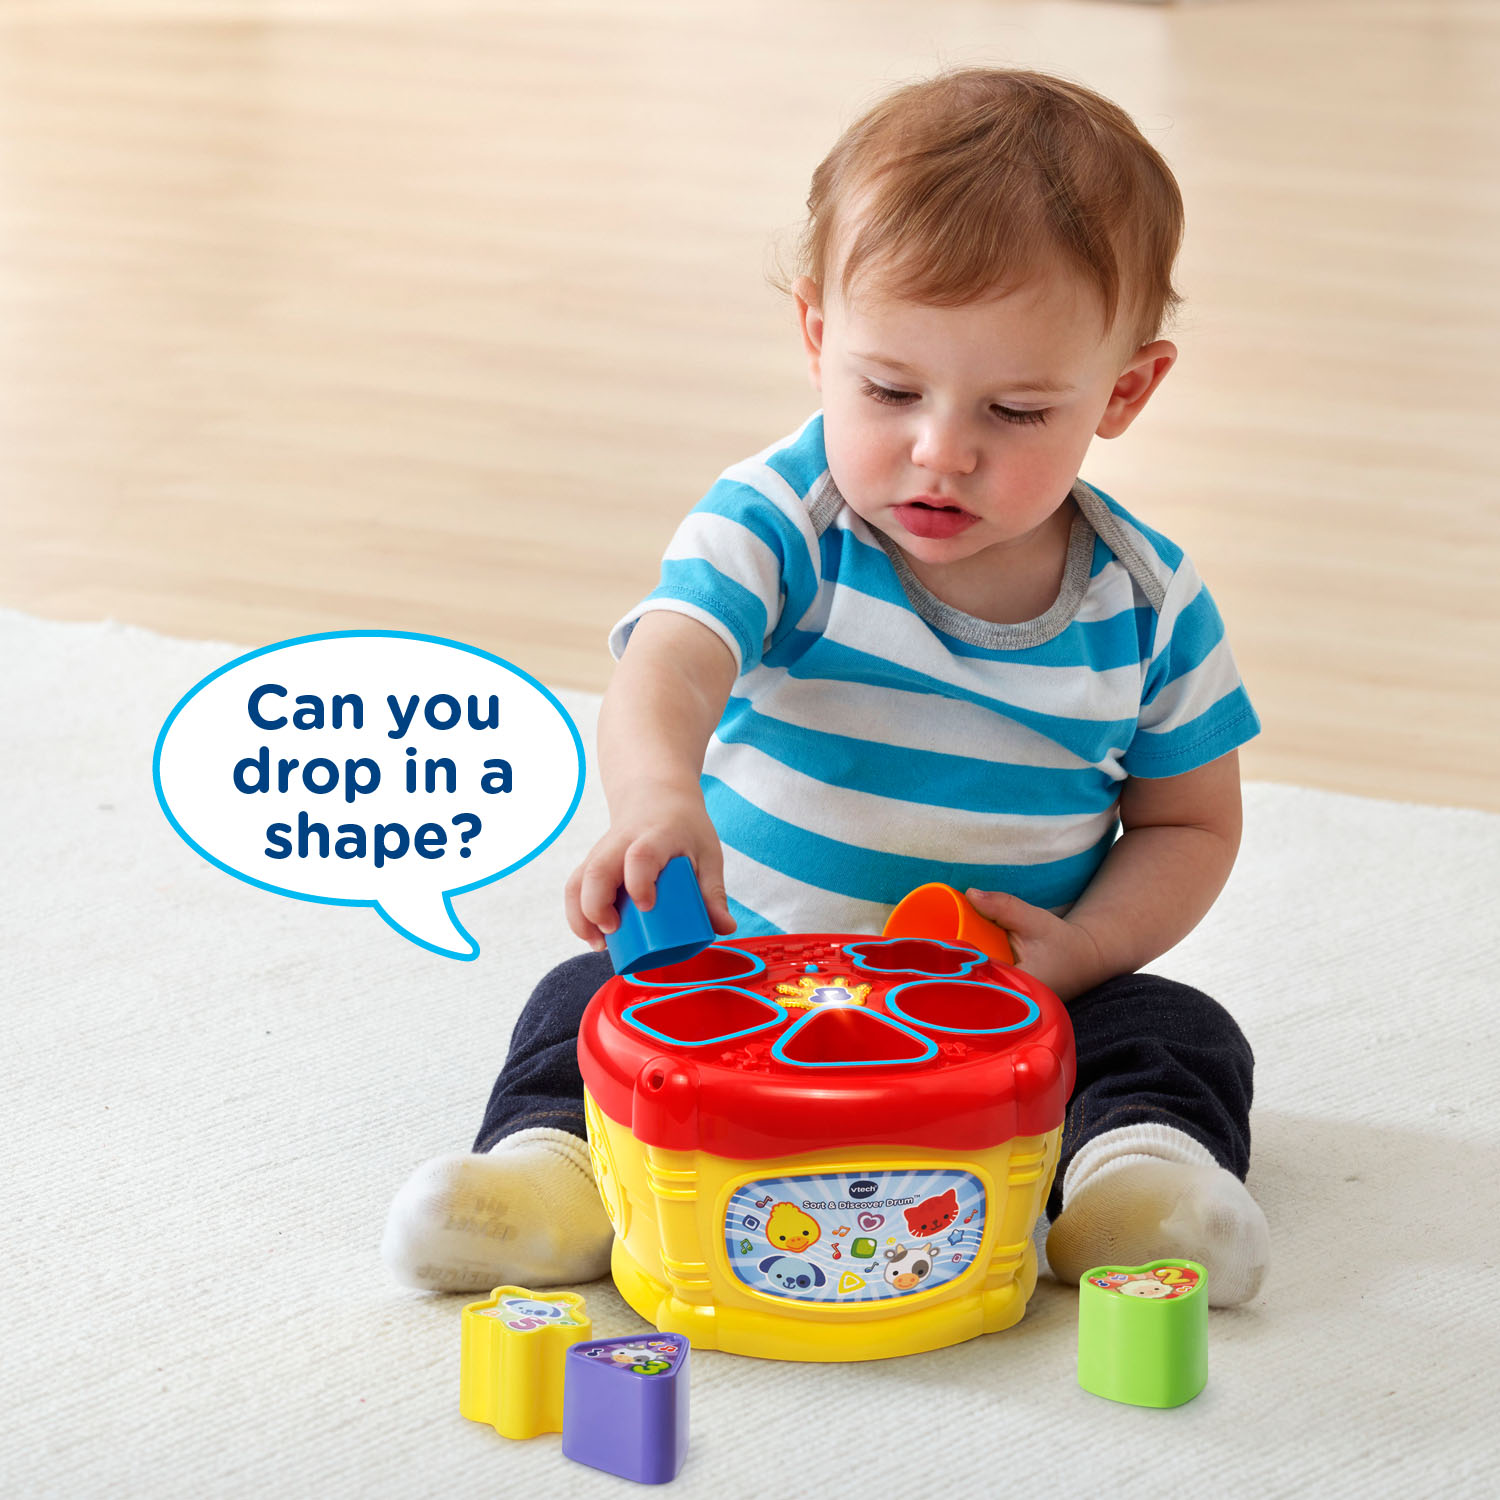 VTech, Sort and Discover Drum, Interactive Learning Toy, Baby Drum - image 4 of 9